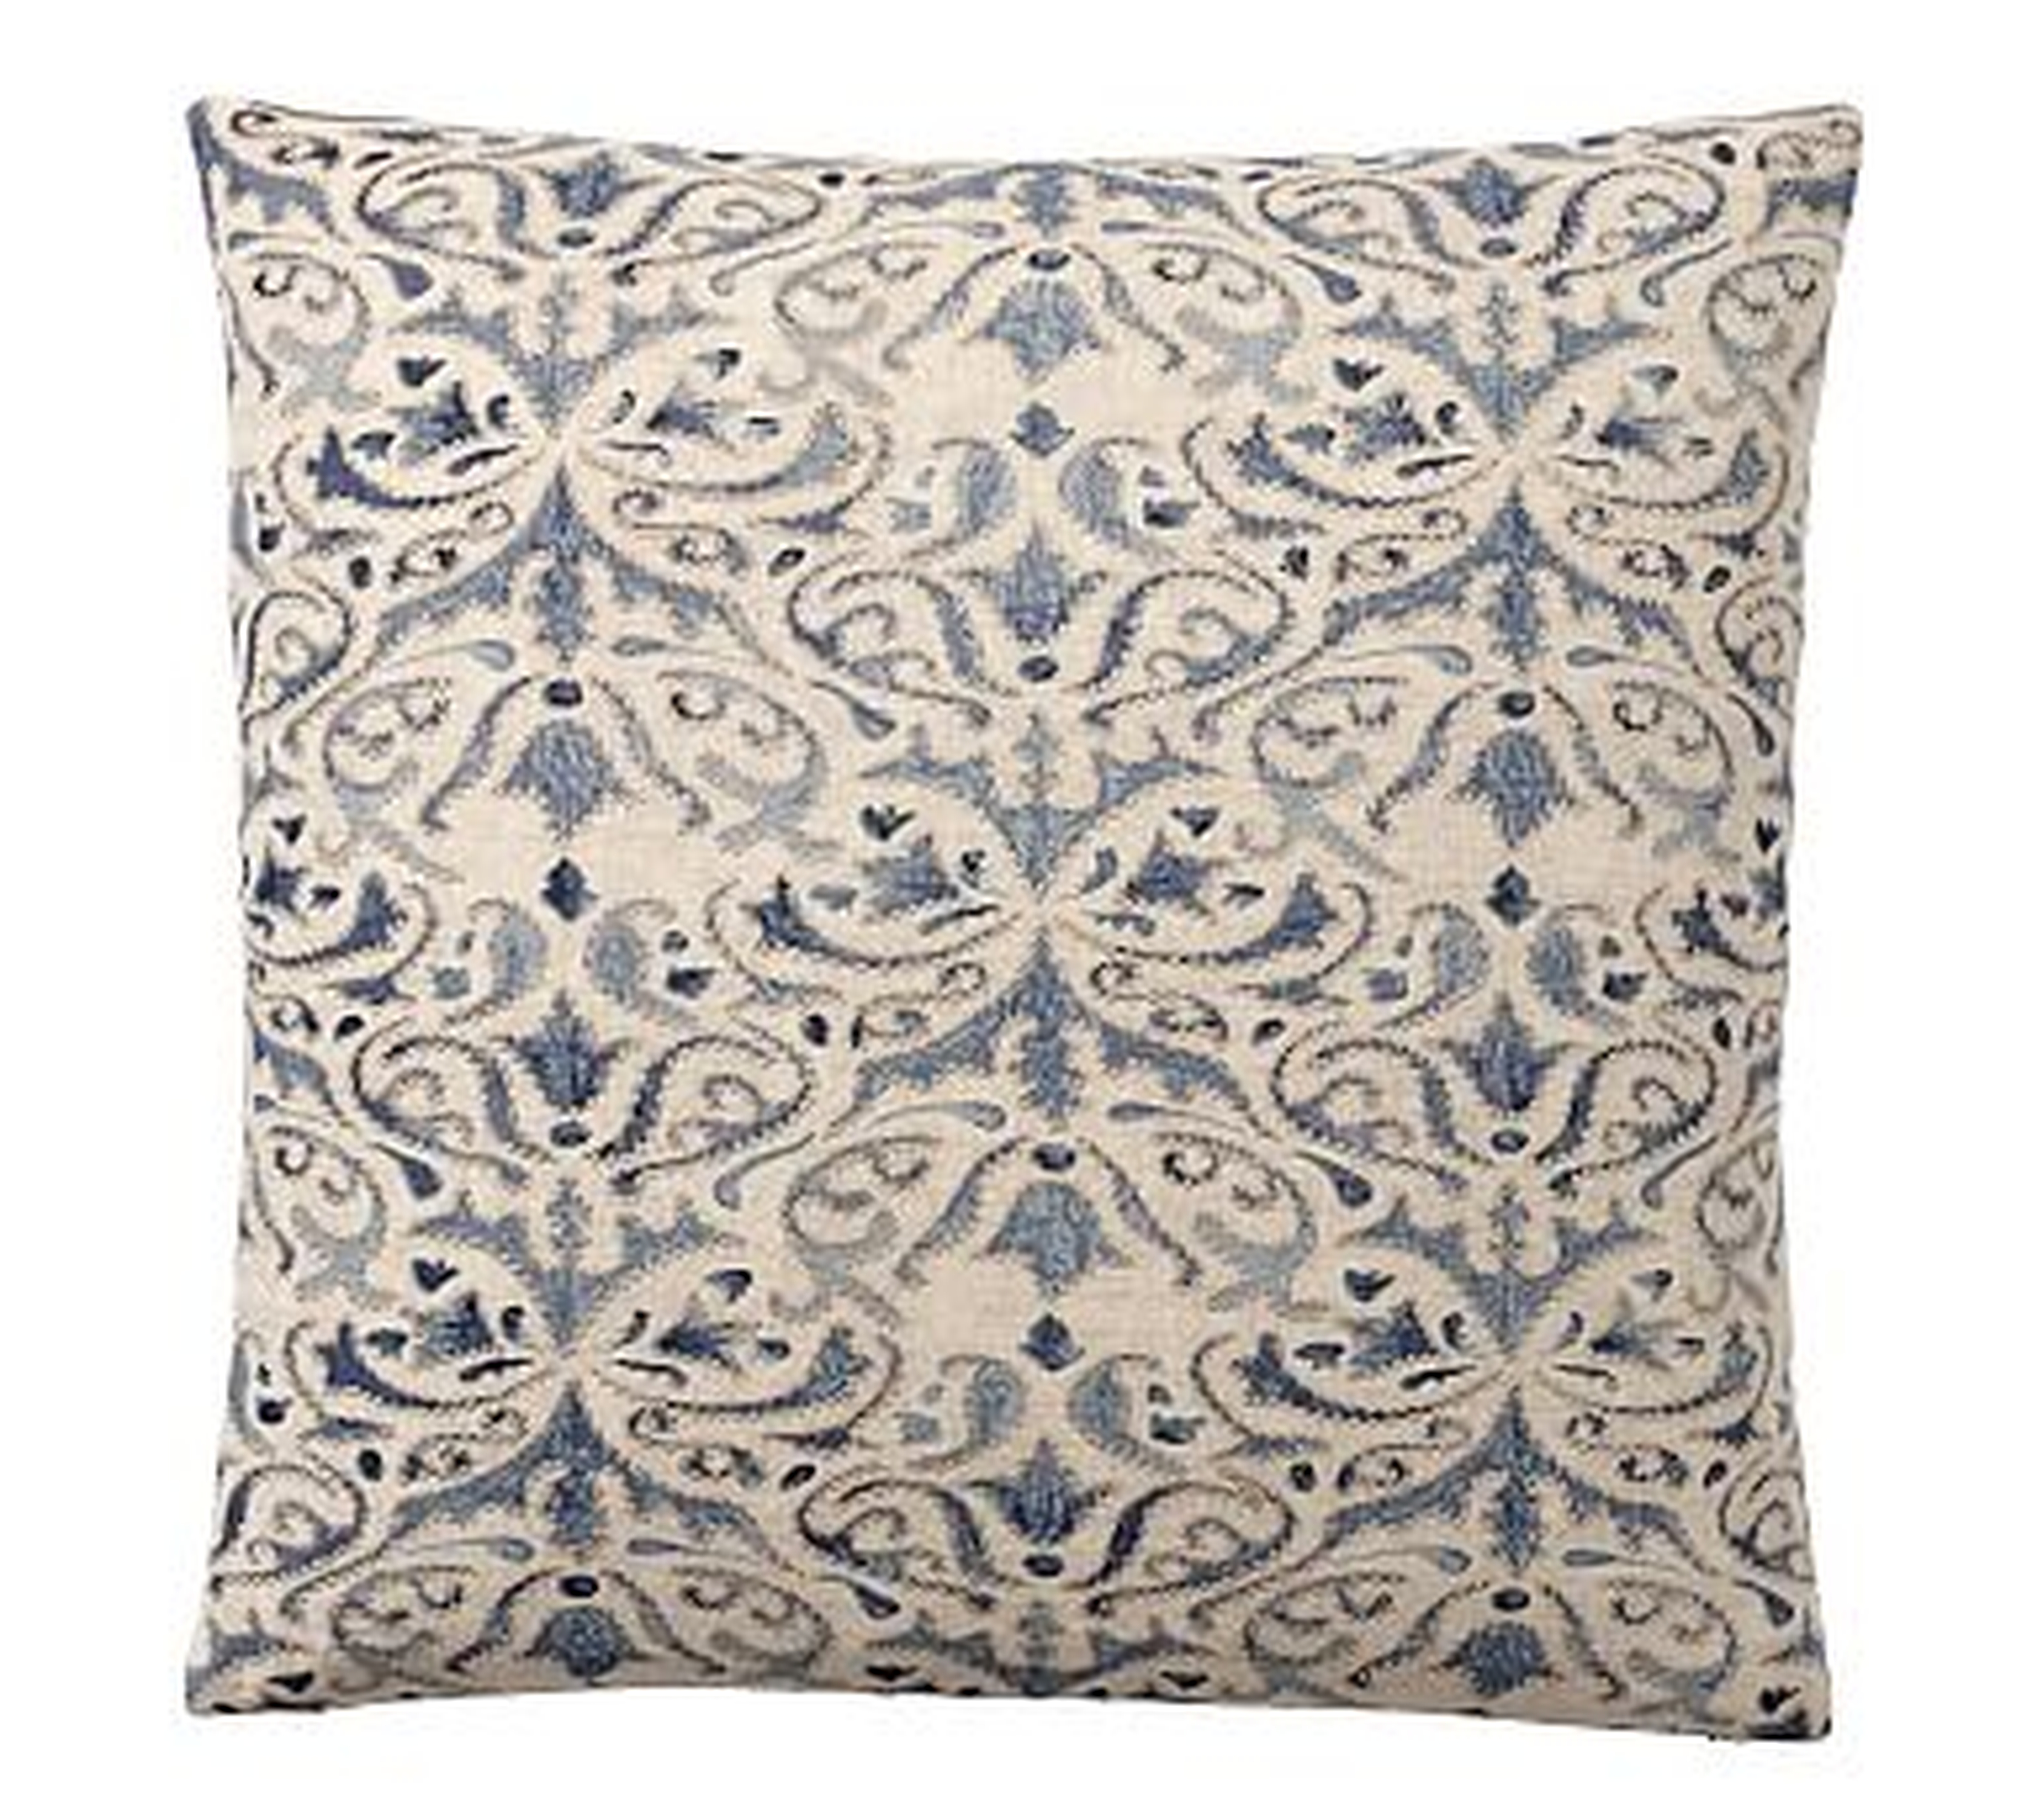 Reilley Embroidered Pillow Cover, 22", Blue - Pottery Barn